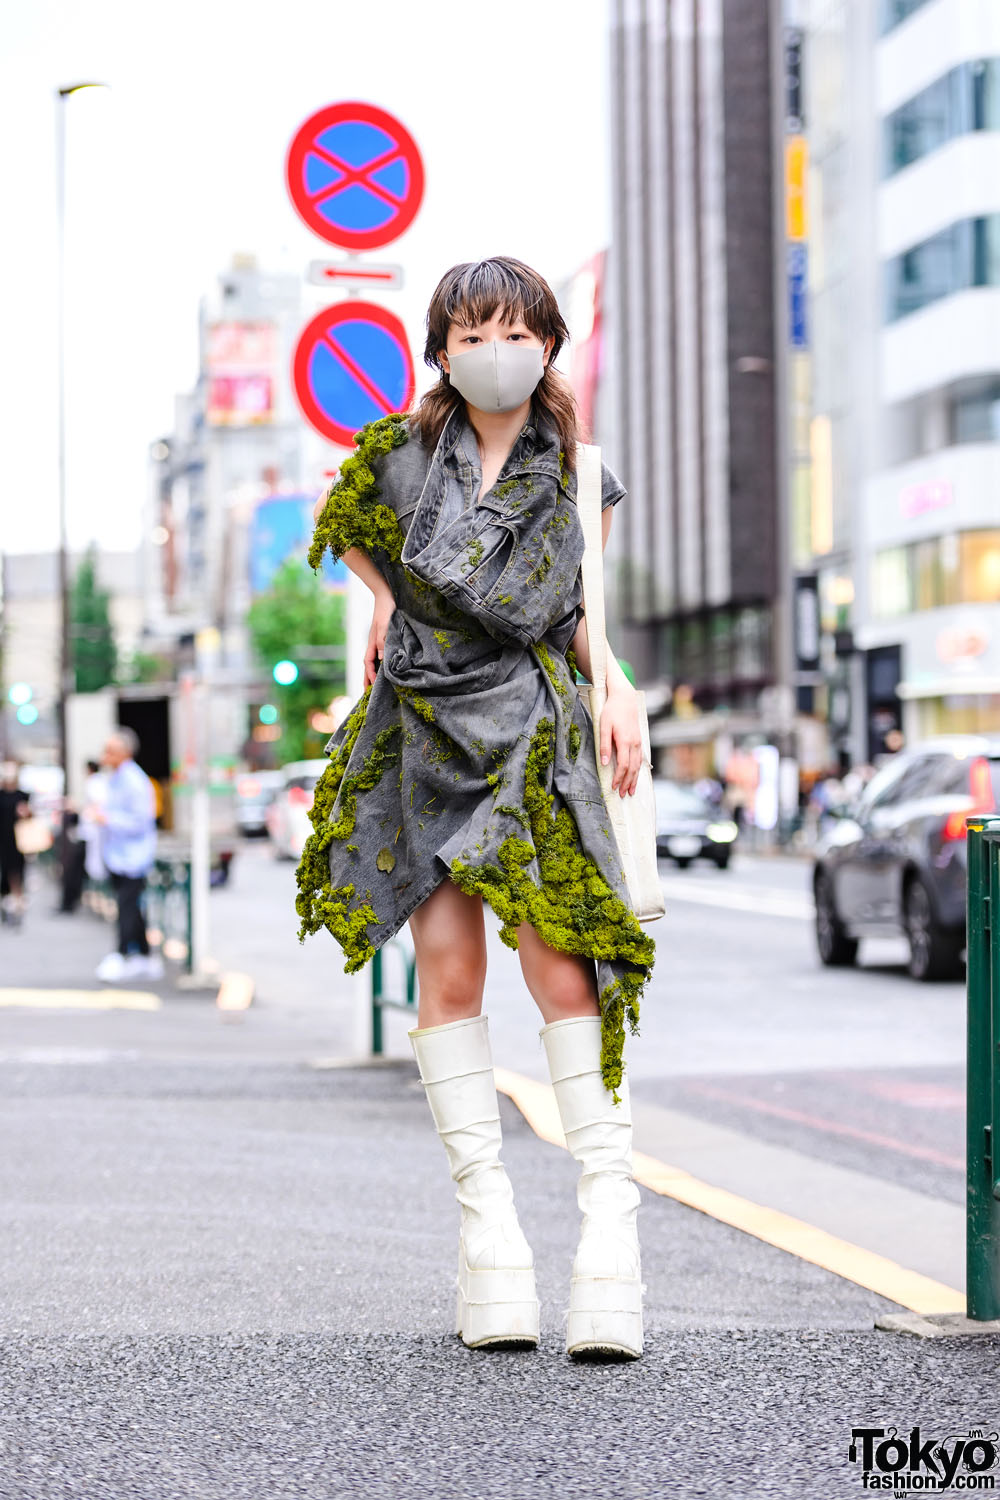 Japanese Fashion Designer in Handmade Moss-Covered Denim Dress & Tall Boots on the Street in Harajuku